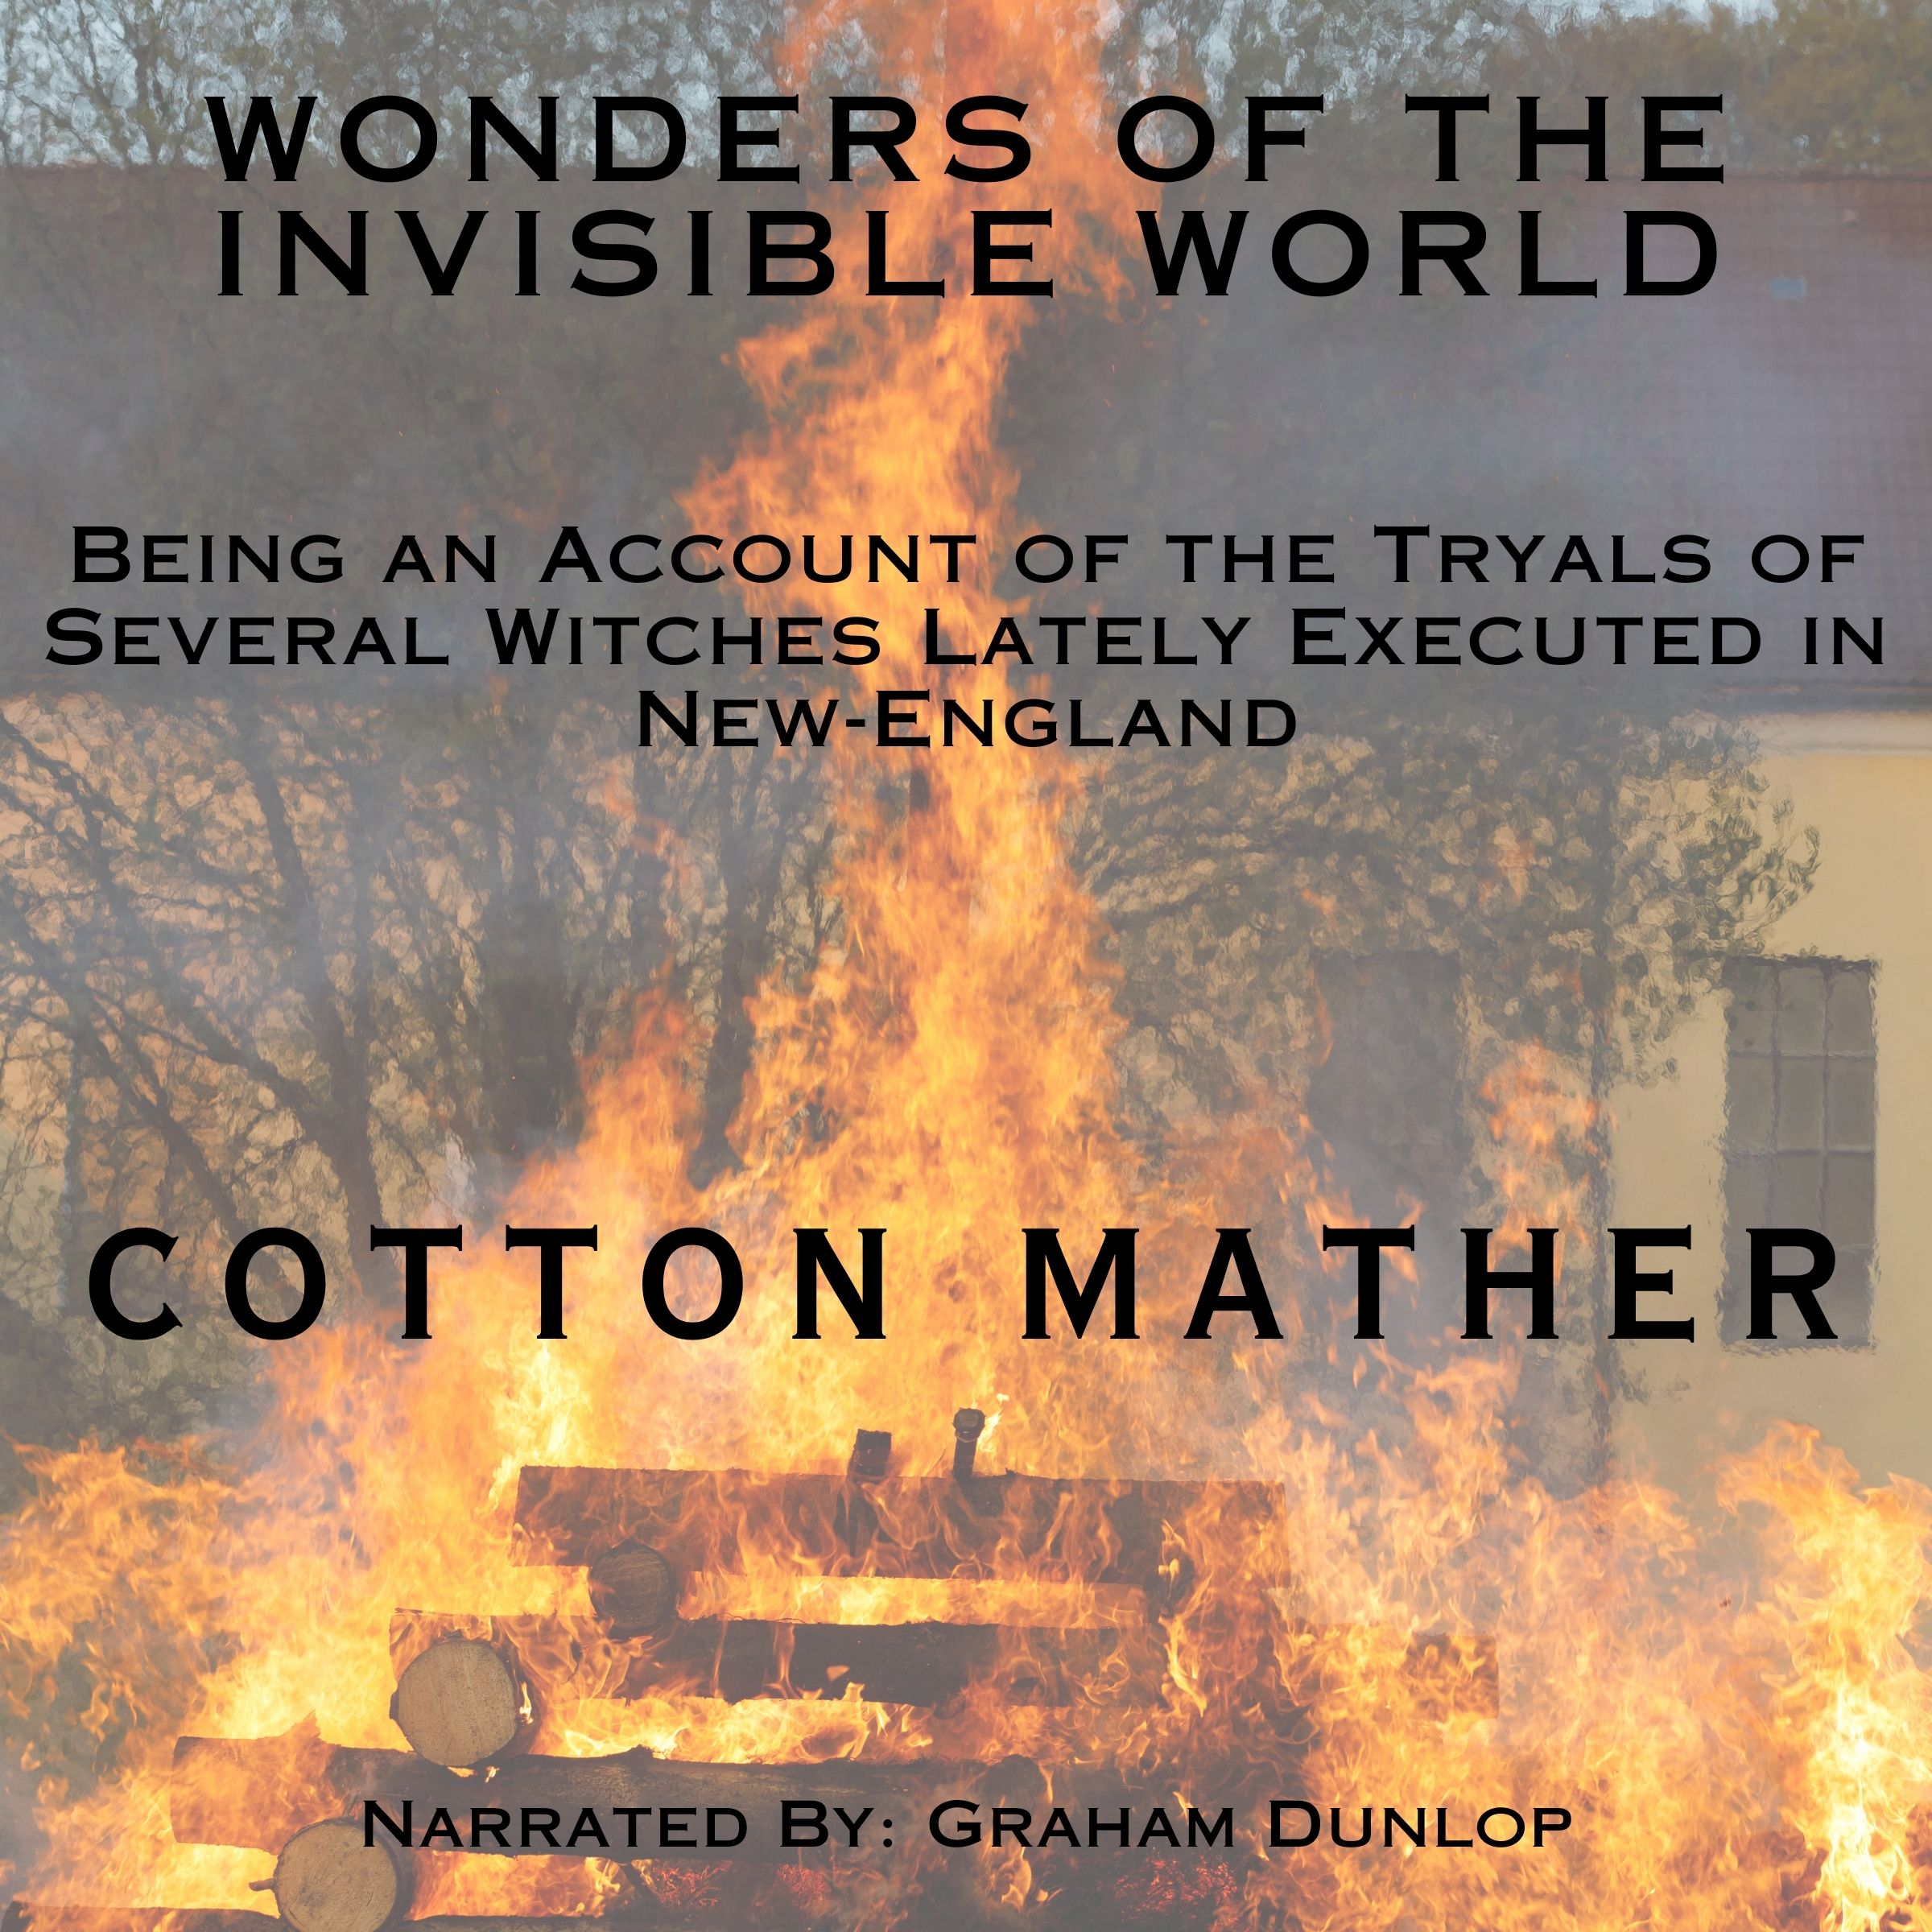 The Wonders of the Invisible World. Cotton Mather – Sign up for